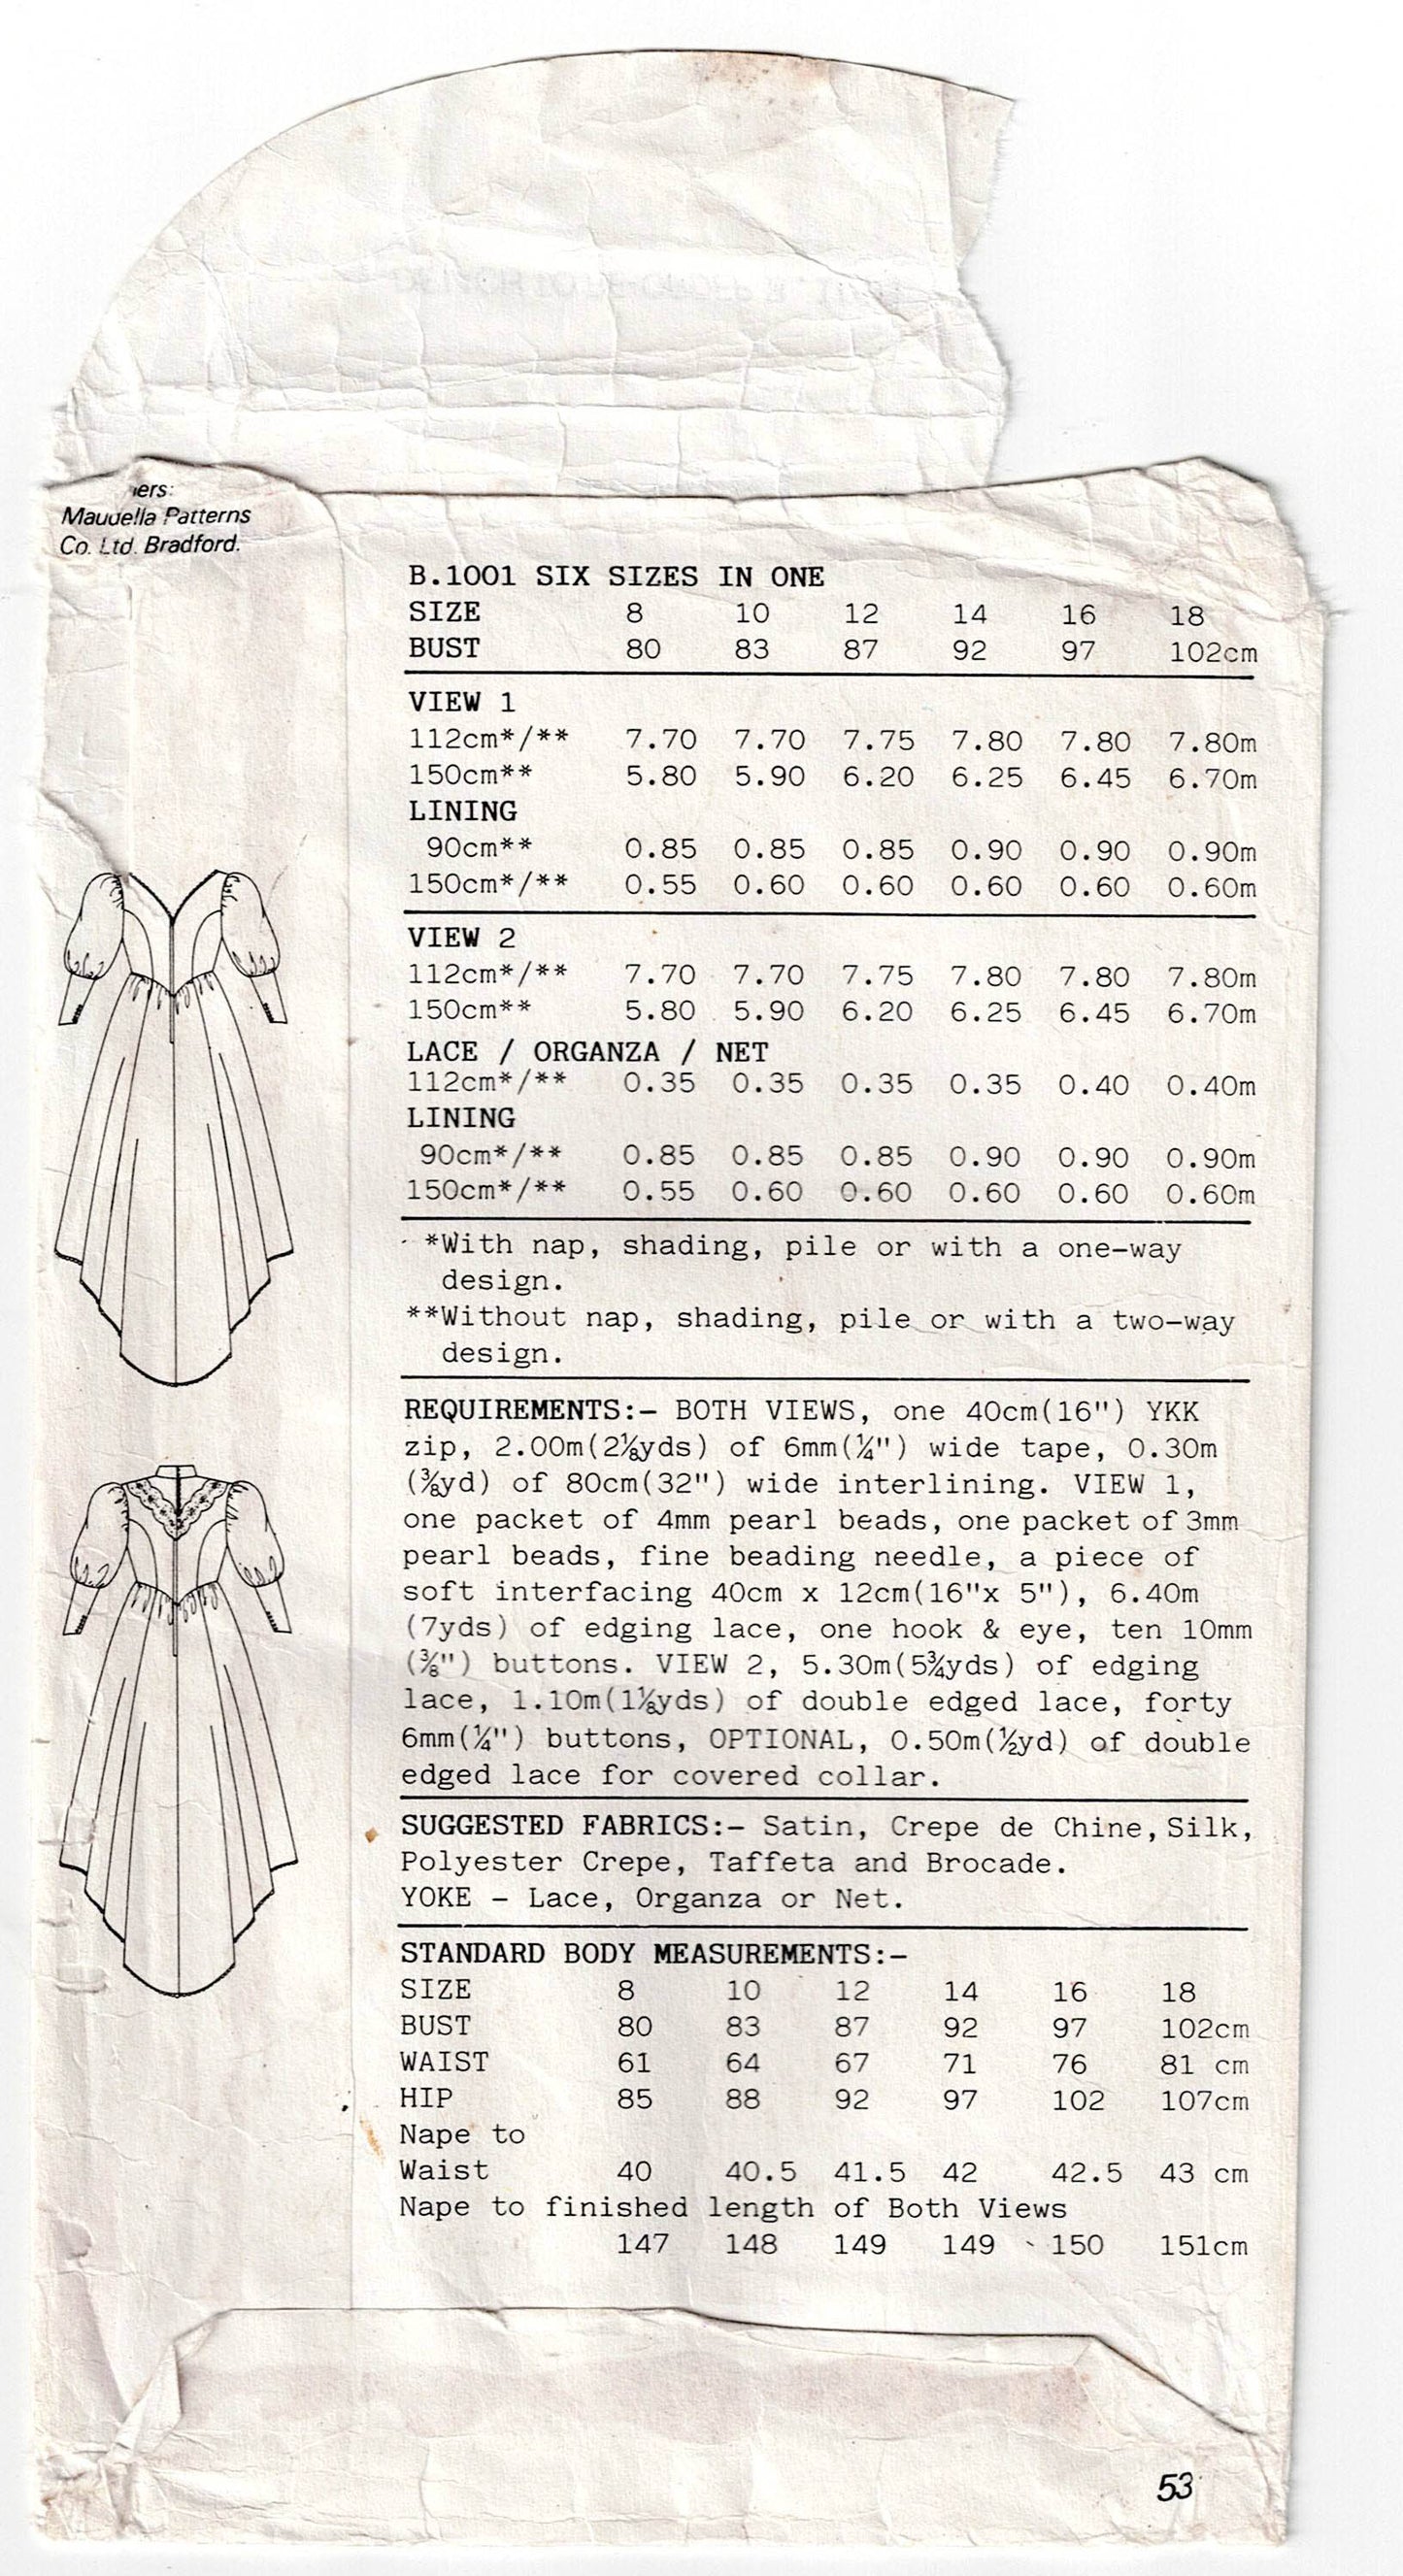 New Look B1001 Womens Princess Seamed Wedding Dresses 1980s Vintage Sewing Pattern Size 8 - 18 UNCUT Factory Folded